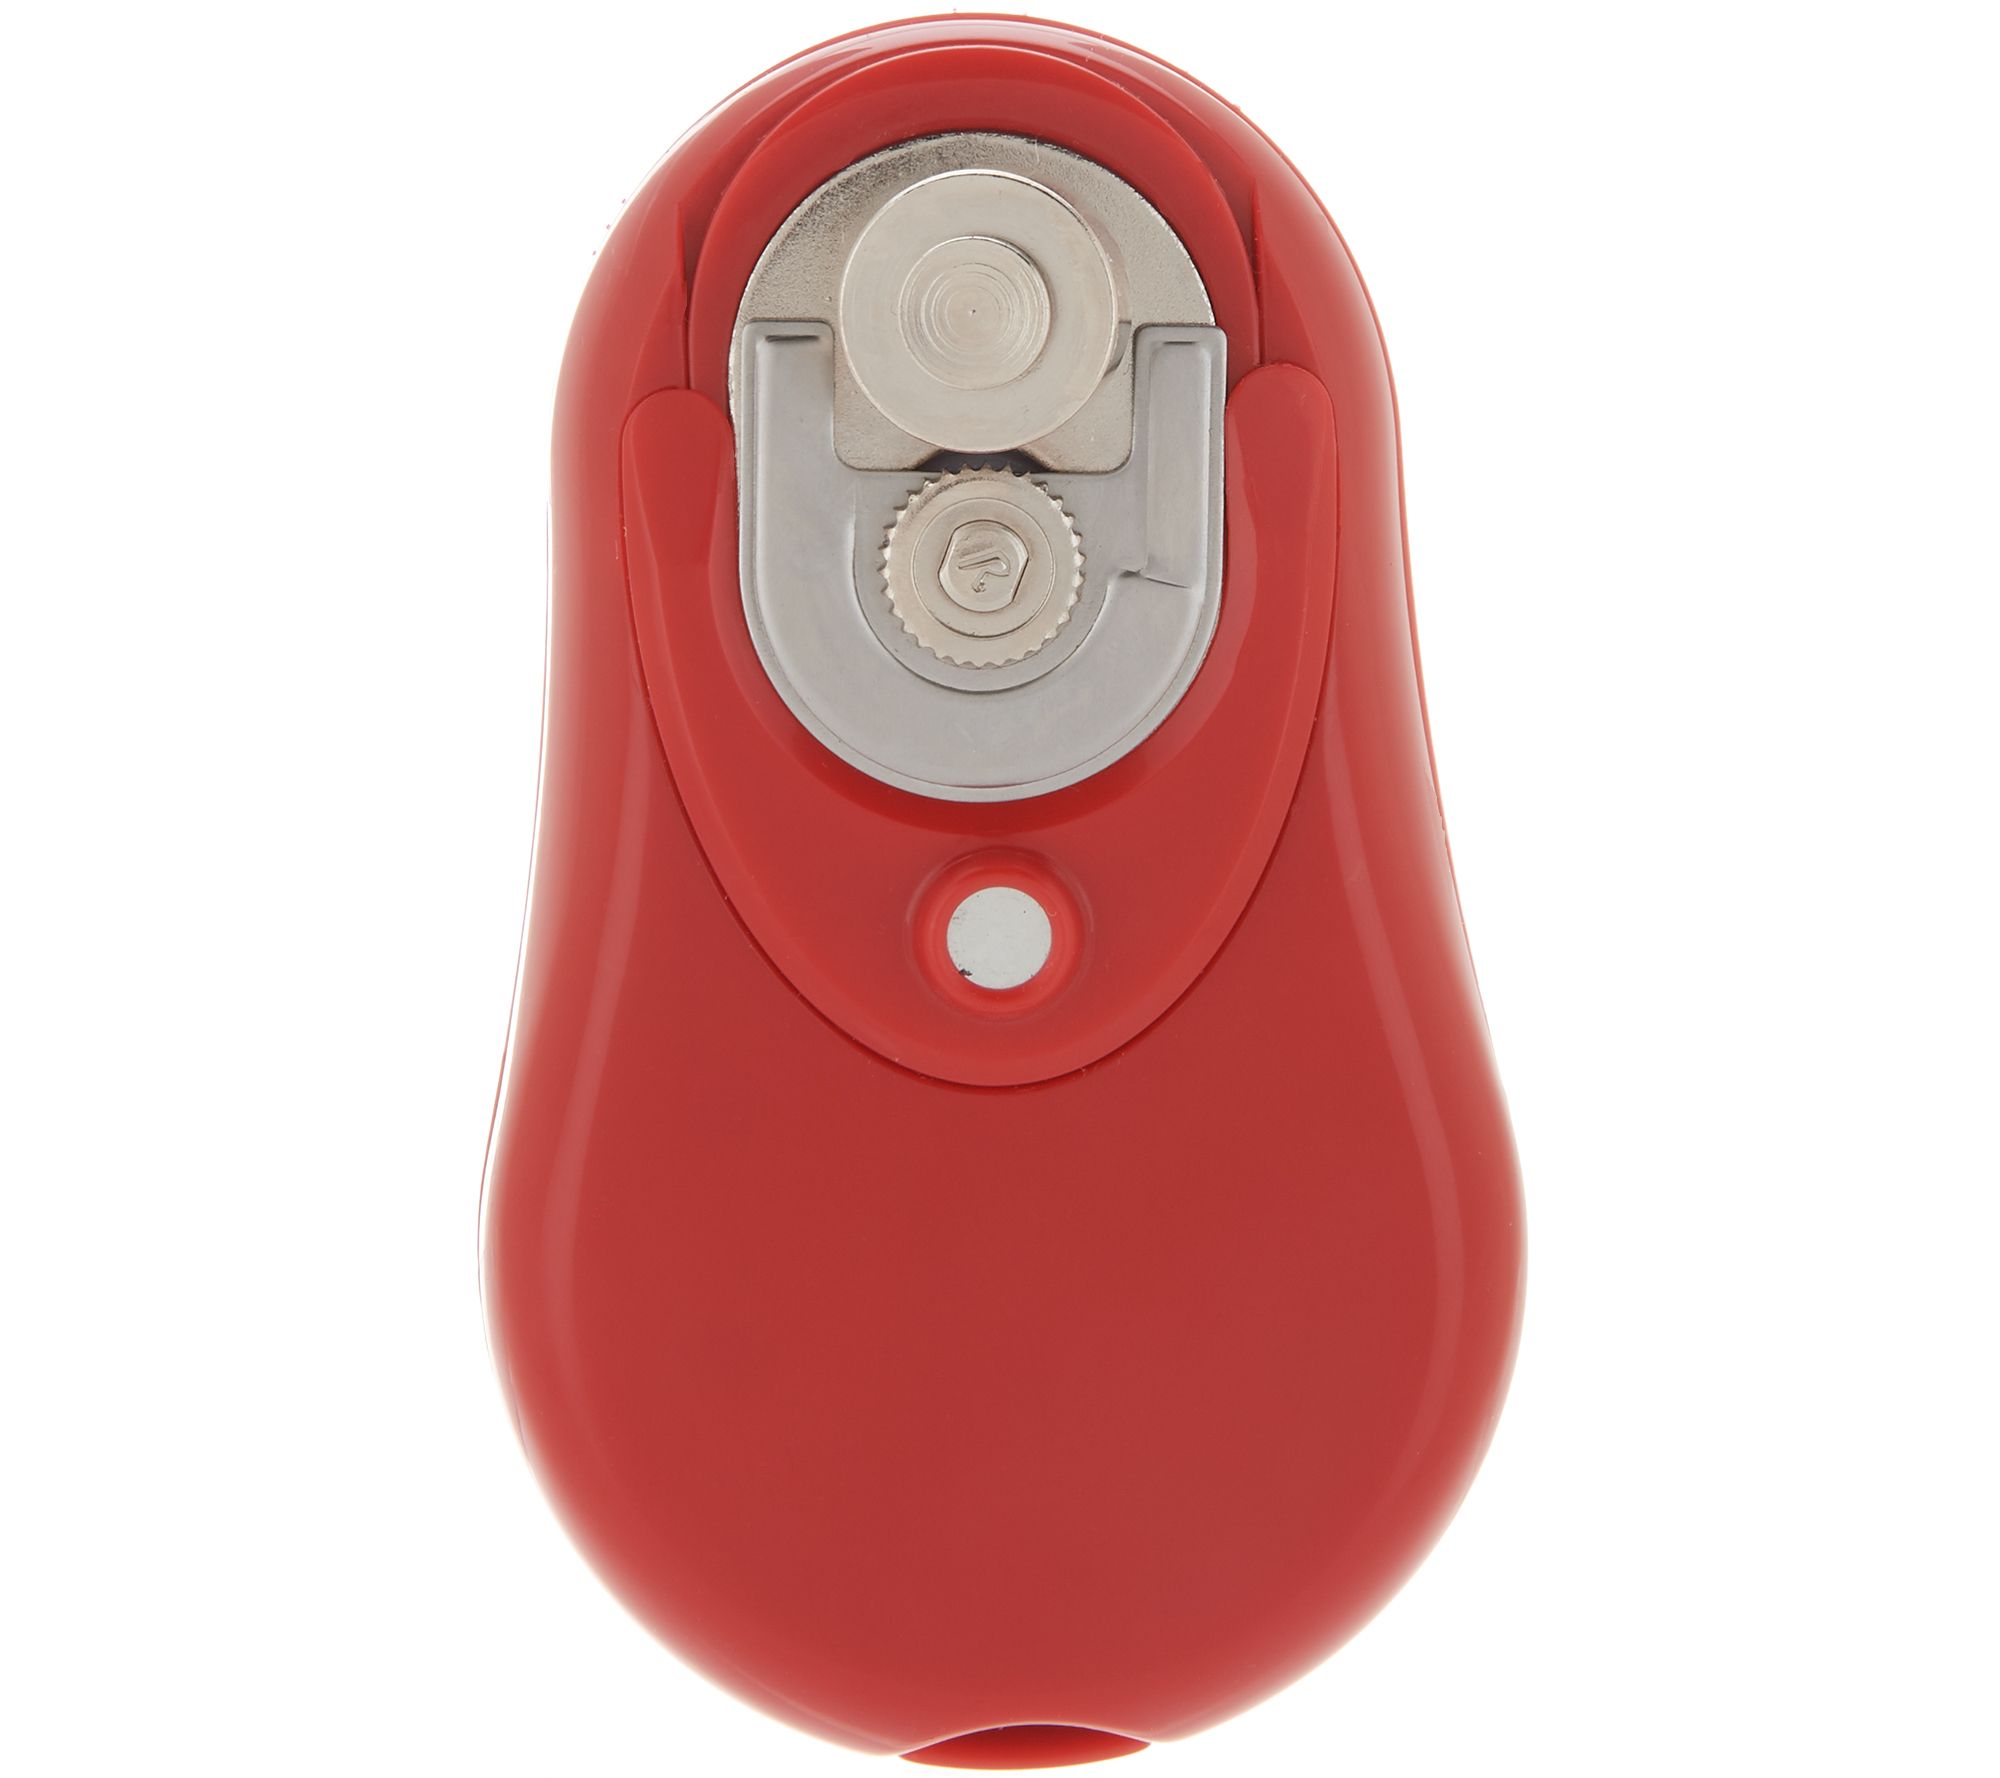 Tornado F4 Hands Free Automatic Can Opener